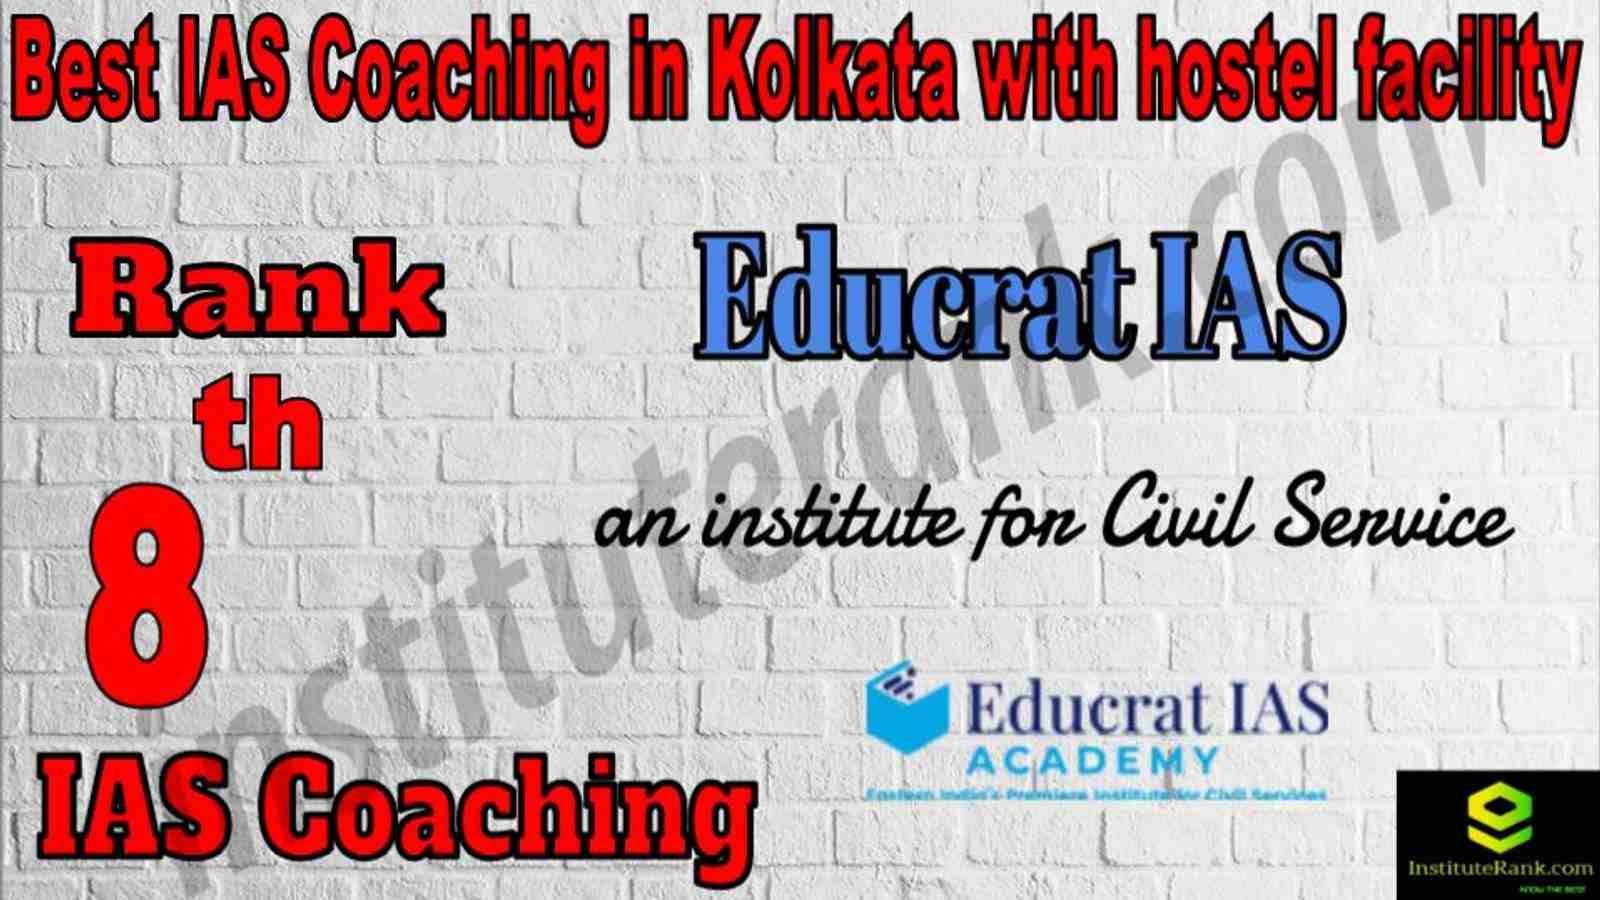 8th Best IAS Coaching in Kolkata with hostel facility